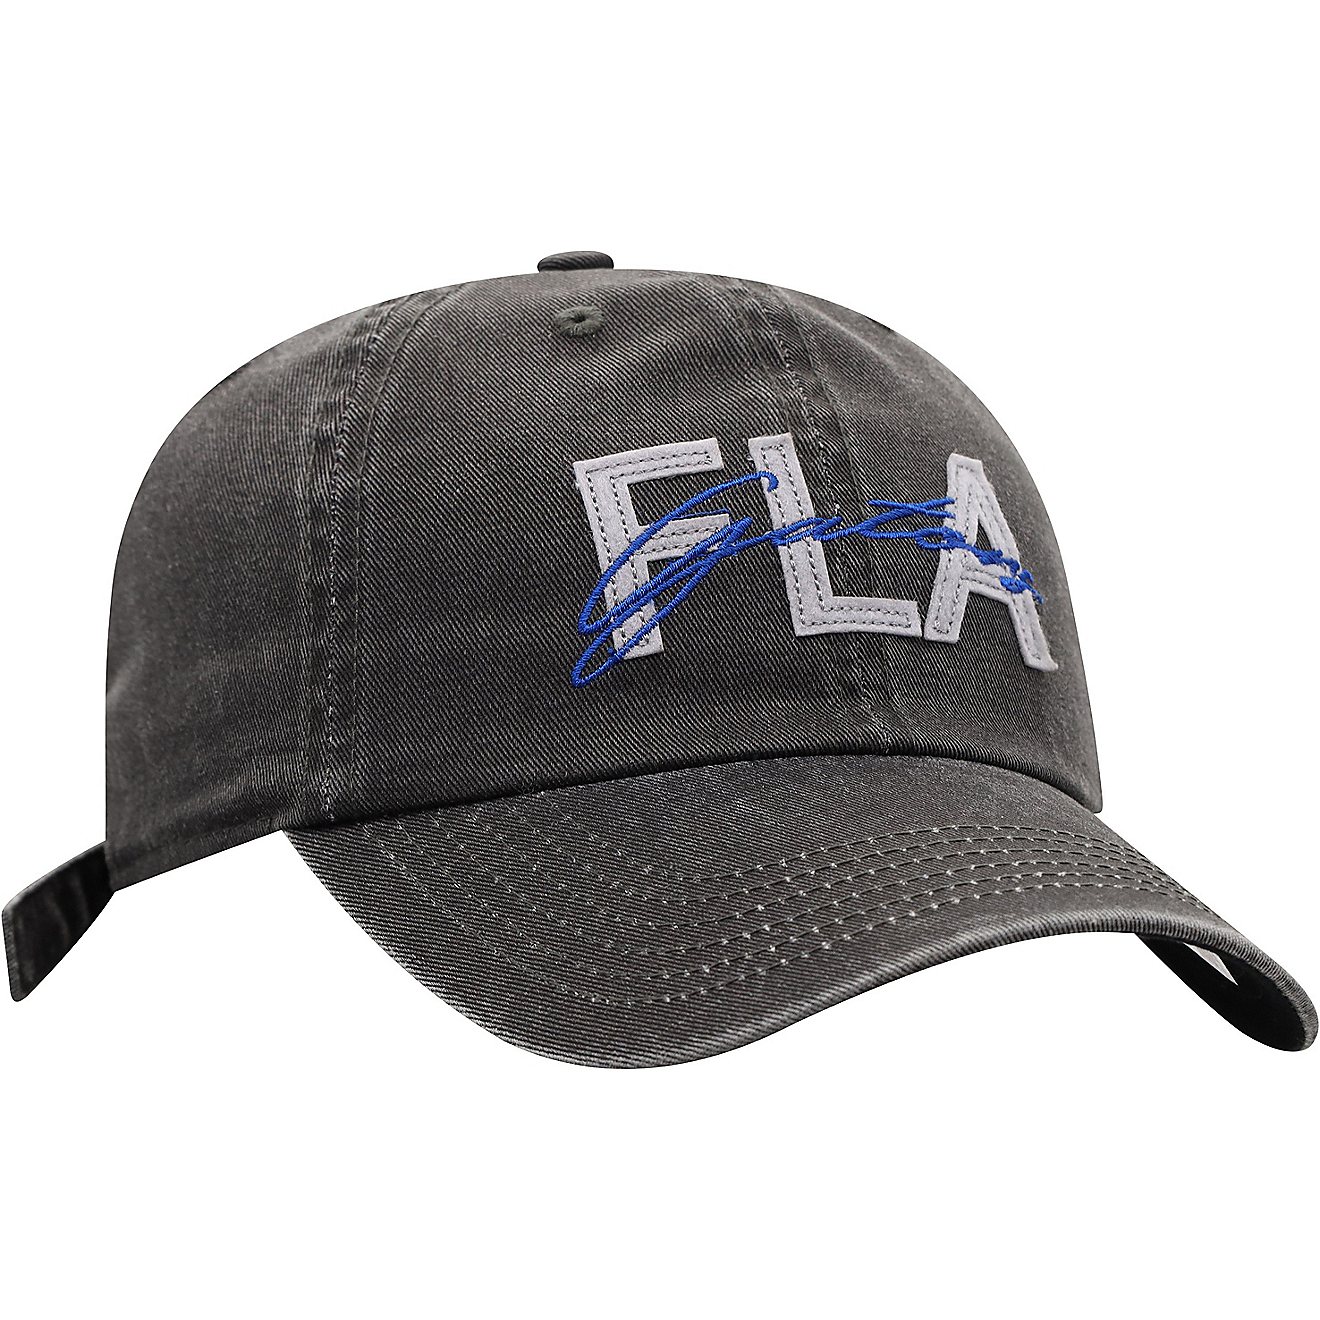 Top of the World Women's University of Florida Sola ADJ Cap                                                                      - view number 4